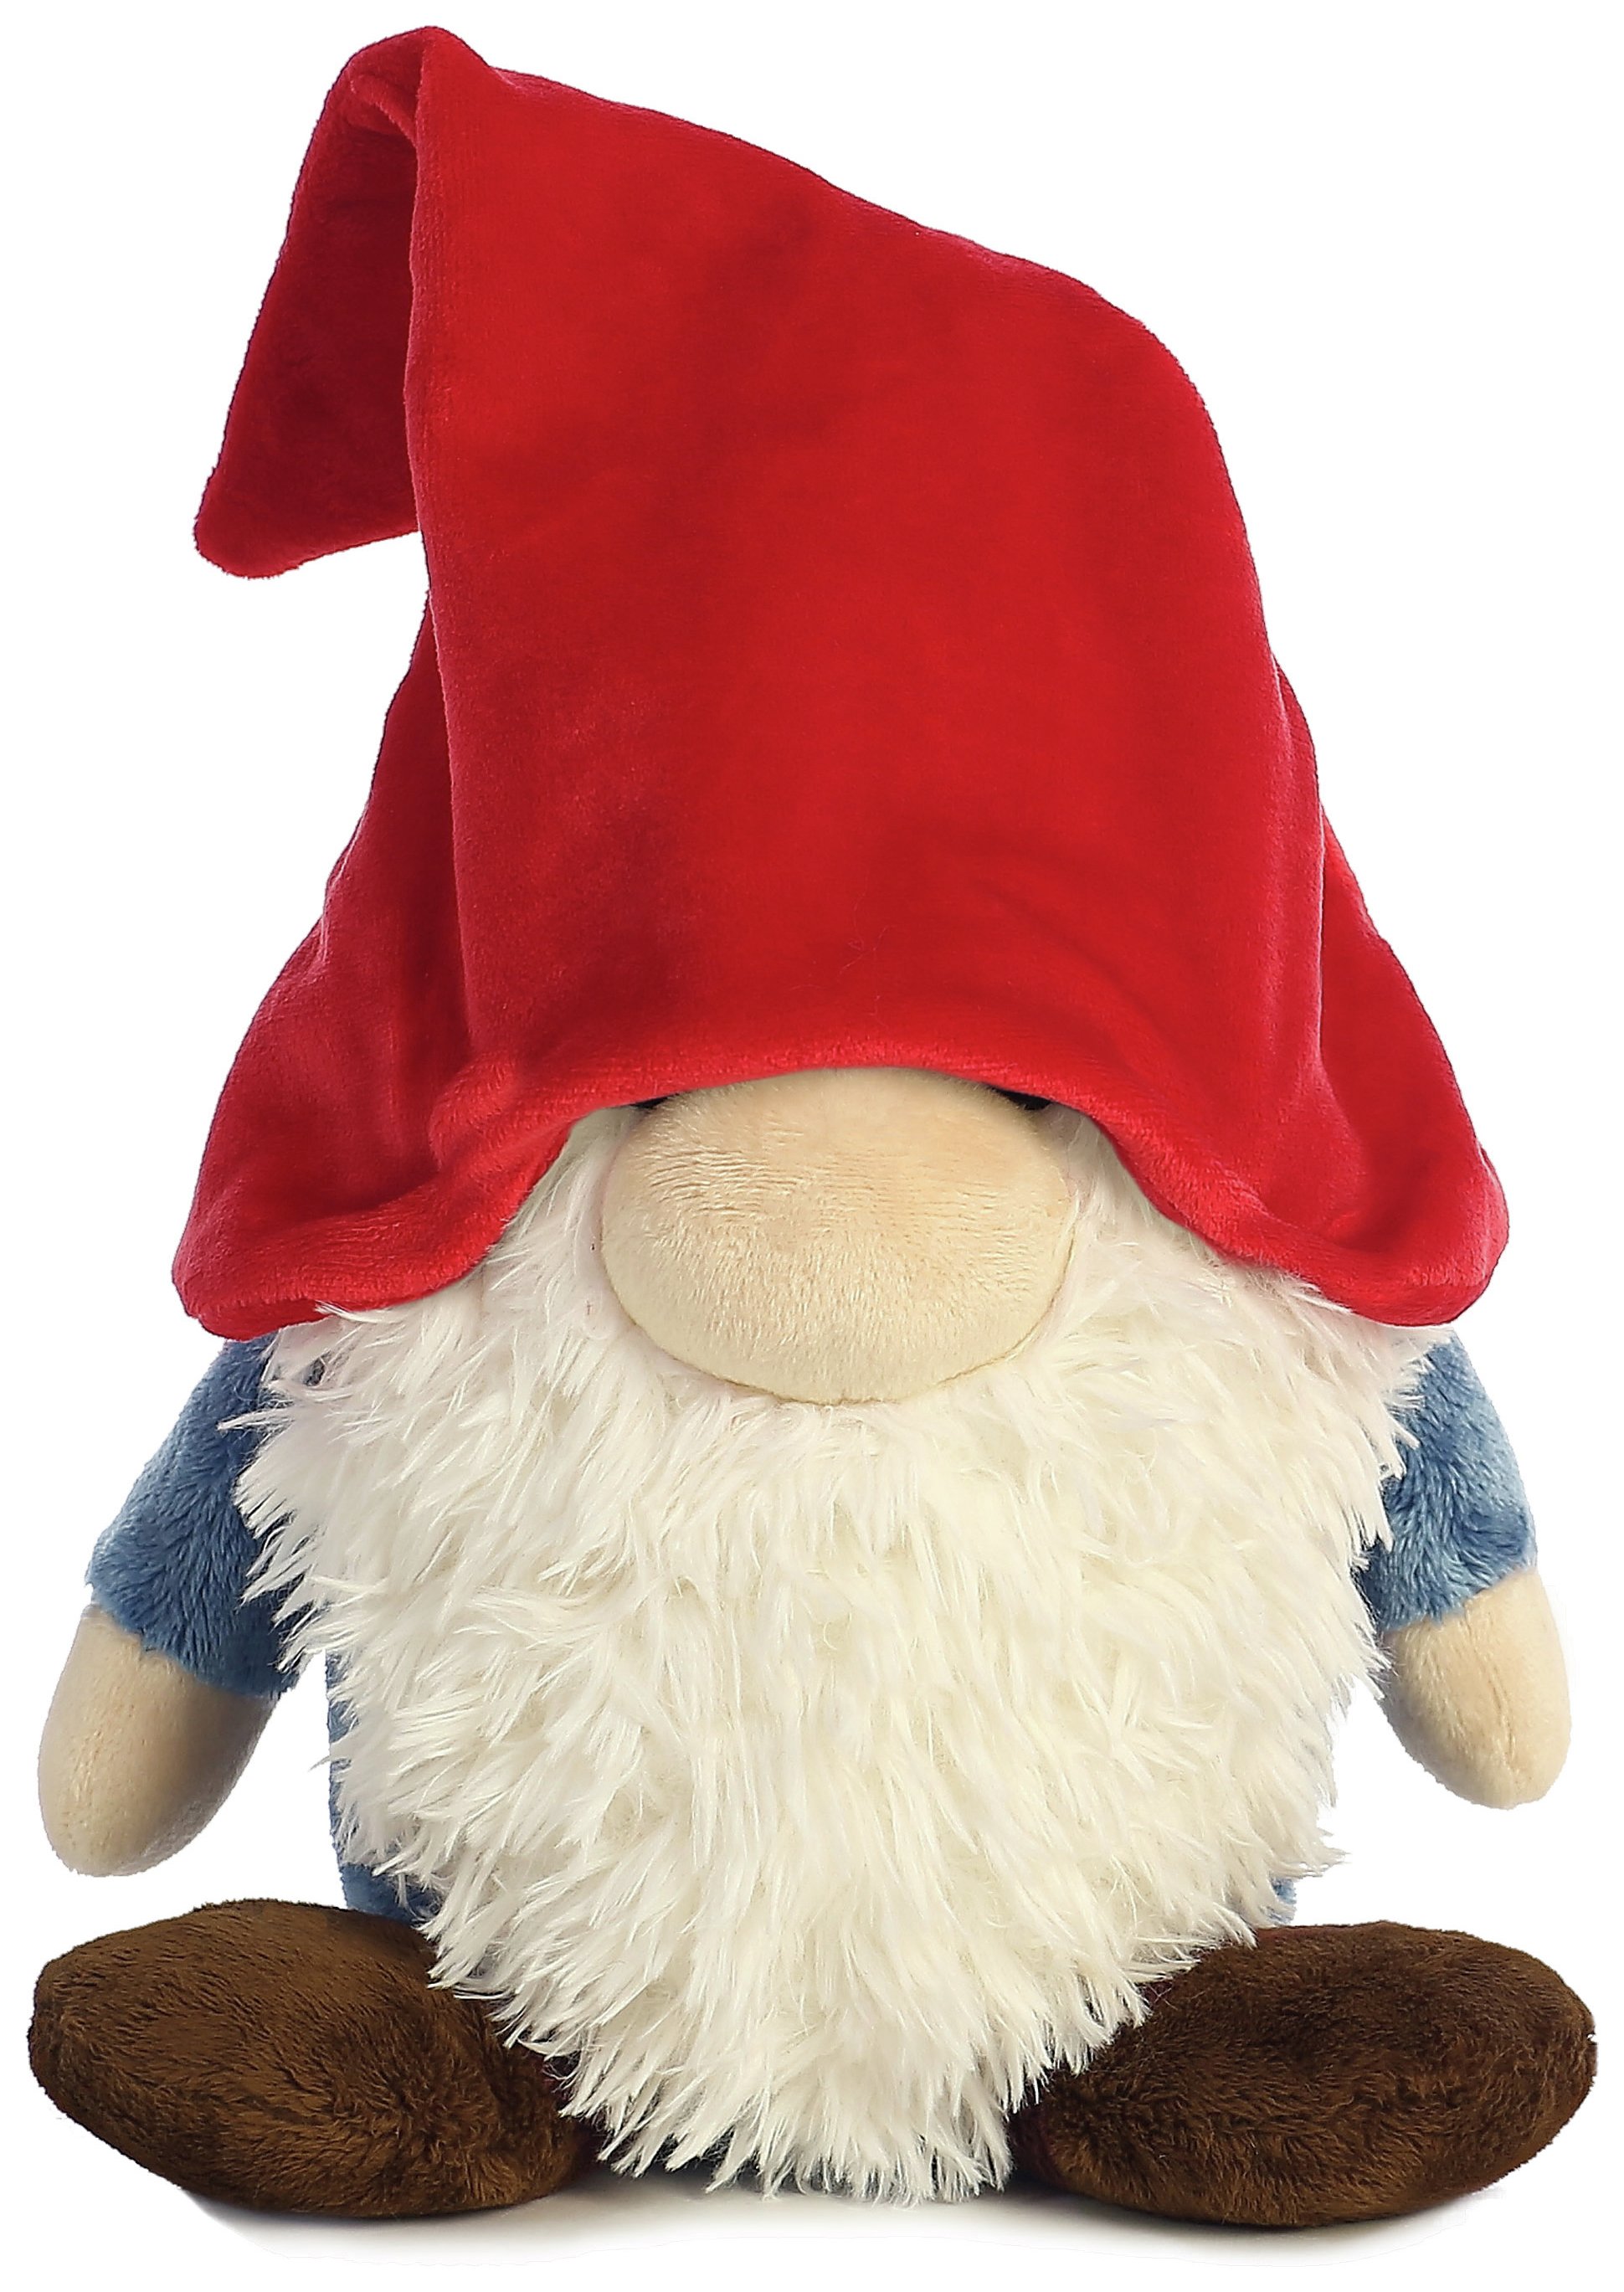 Aurora 16inchGnome with Red Hat and Blue Shirt